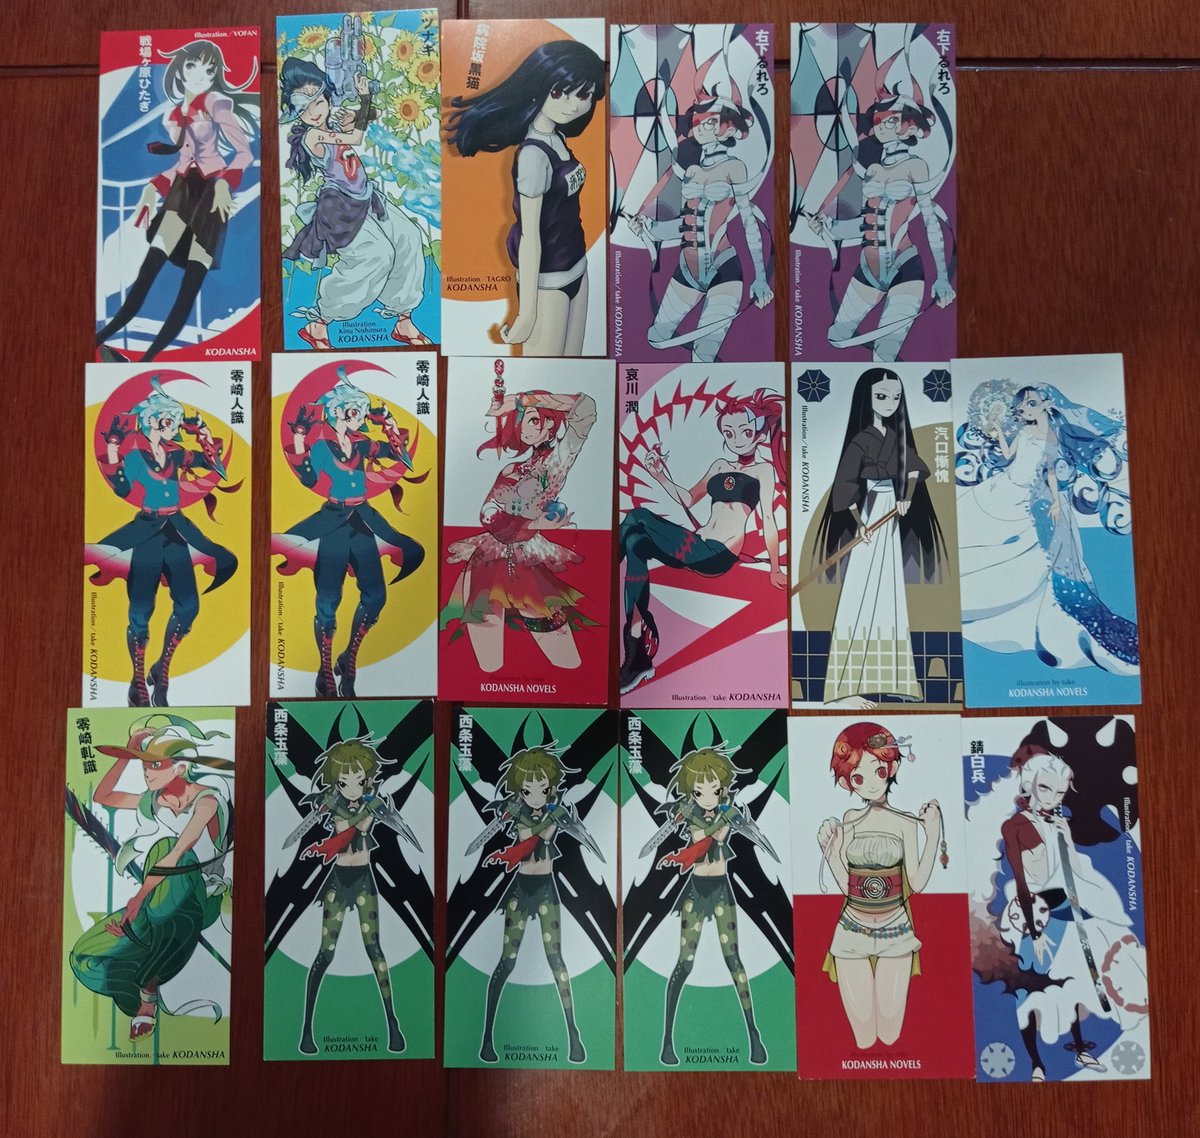 It comes with a lot of bookmarks (some are repeated)It comes with a tiny book wich contains the "Specifications of Glory" short story of the Nakoto series (bookmark for scale)